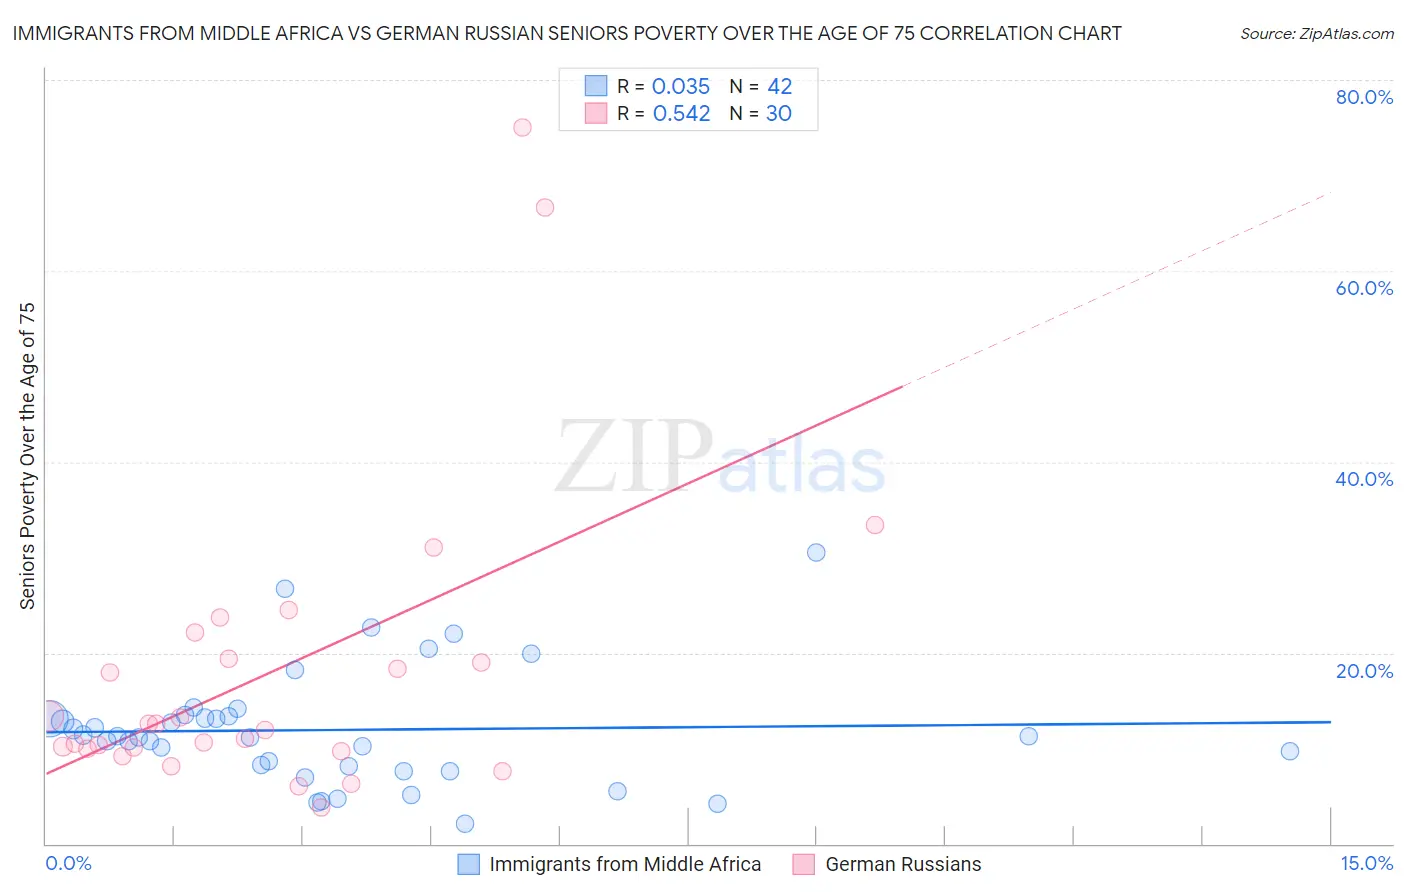 Immigrants from Middle Africa vs German Russian Seniors Poverty Over the Age of 75